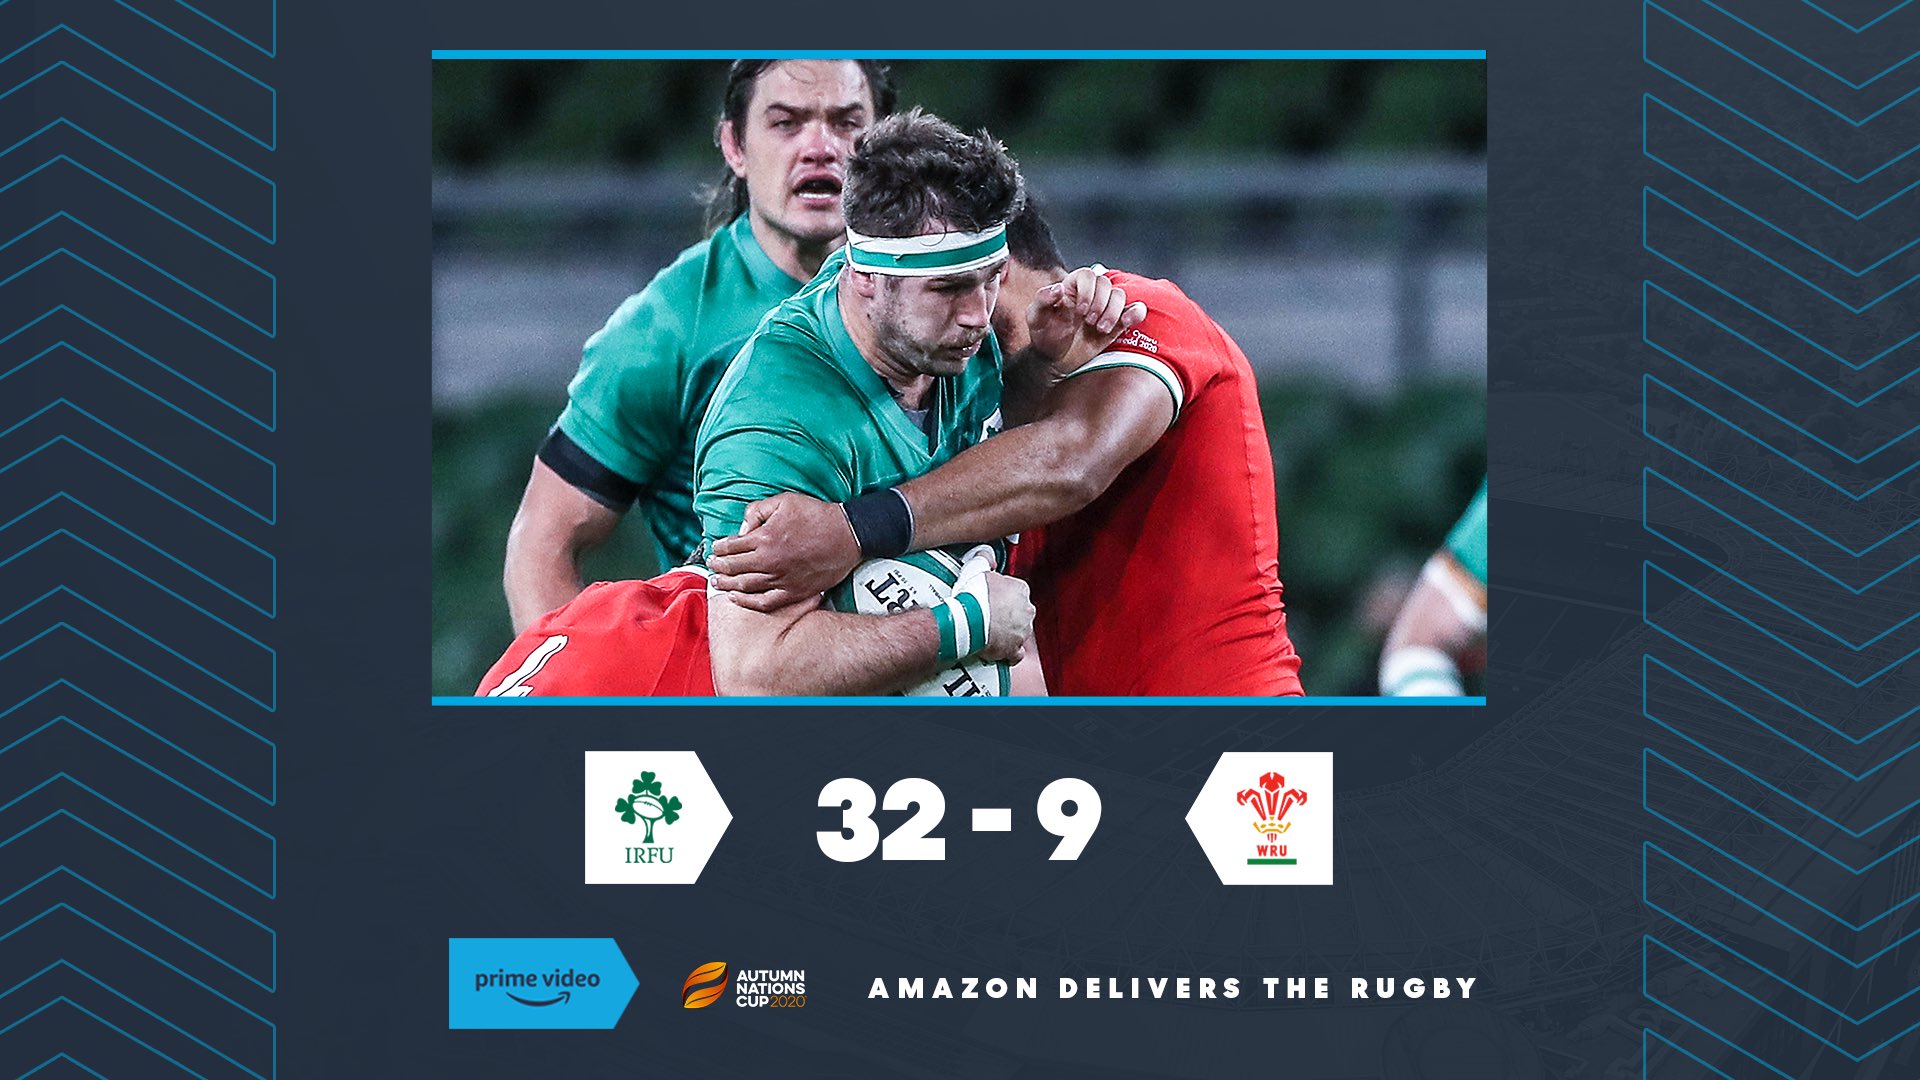 amazon prime video sport rugby